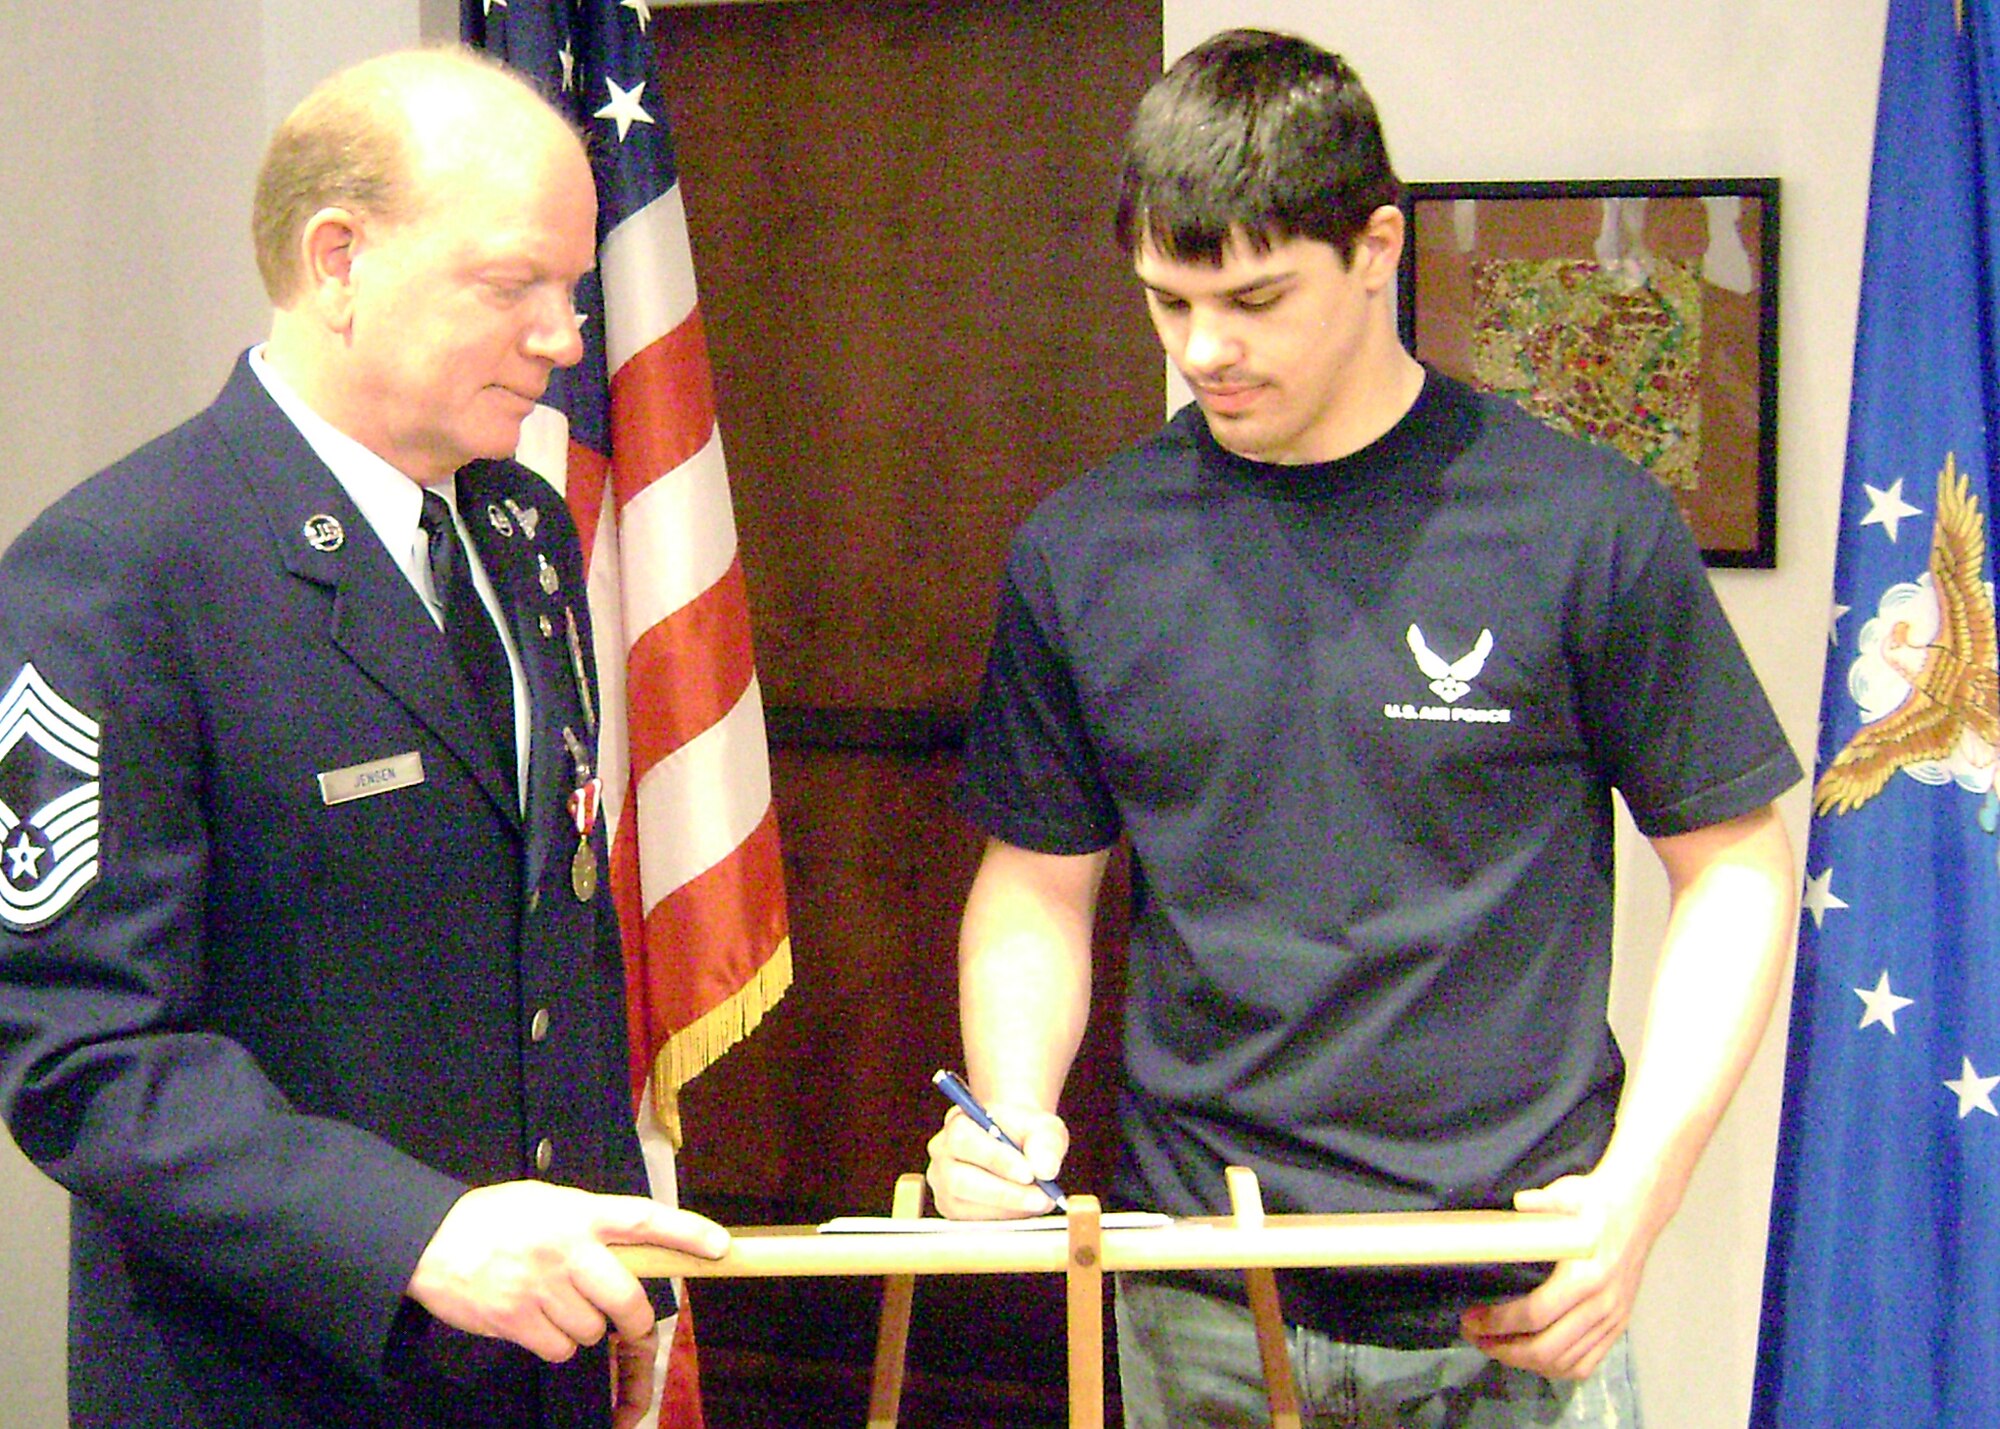 Chief Master Sgt. Kurt Jensen, Air Force Reserve, assists Lee Vancleef from Kendall, Wisc., to join the Air Force in Lacrosse, Wisc., May 1. The former active-duty Air Force survival, evasion, resistance and escape specialist retired from 30 years of Air Force service the same day he helped the 937th person join. (U.S. Air Force photo/Master Sgt. Laurence Lewis)